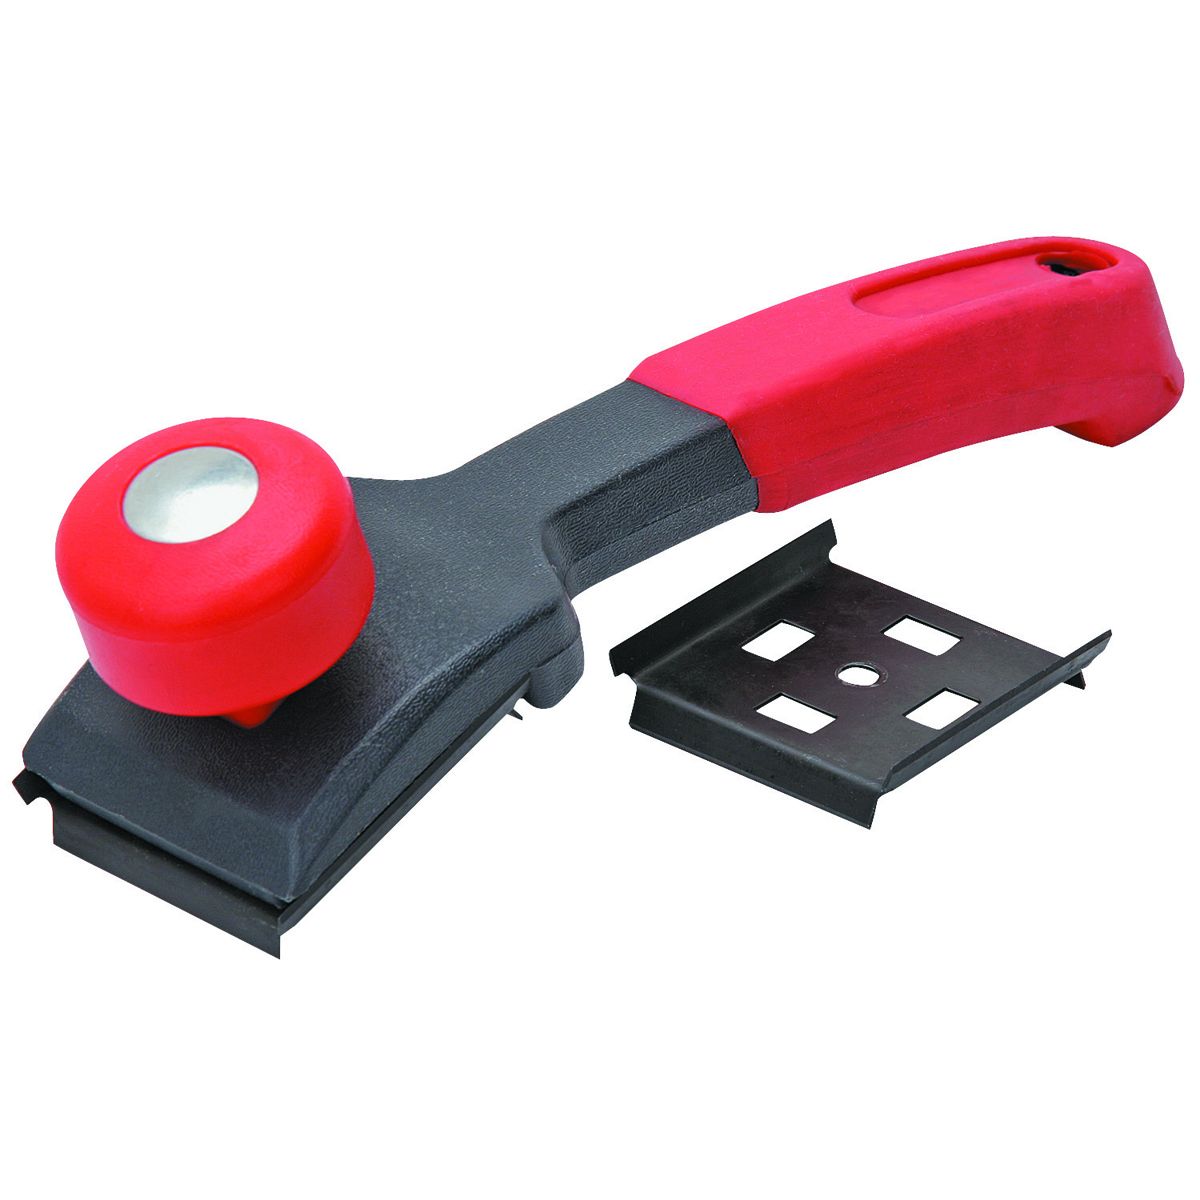 PITTSBURGH 2-1/2" Paint Scraper with 4 Sided Blade